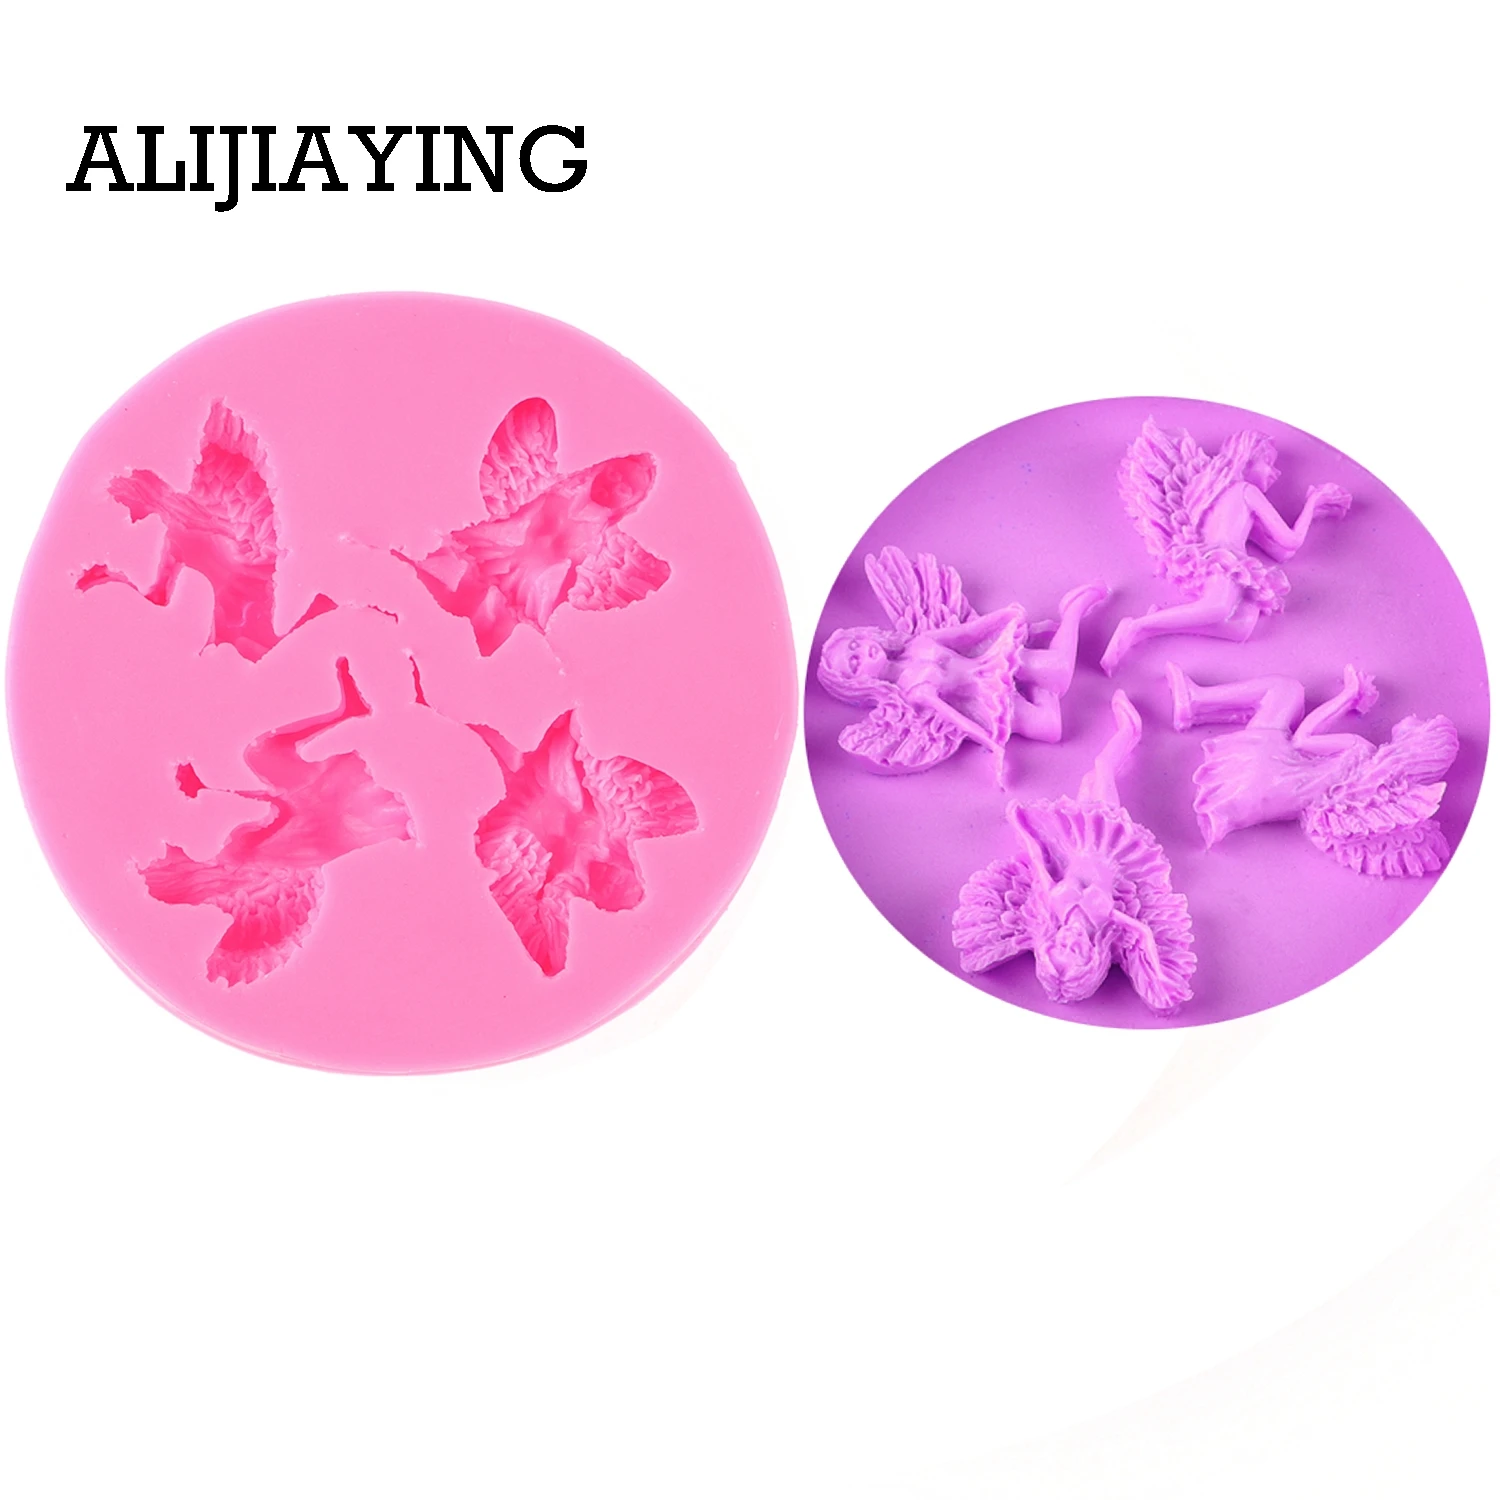 

M0463 Angel Girl Natural Soap Handmade Soap Mold Silicone Cake Ice Modeling Tool Pastry Arts Decorative Kitchen Accessories